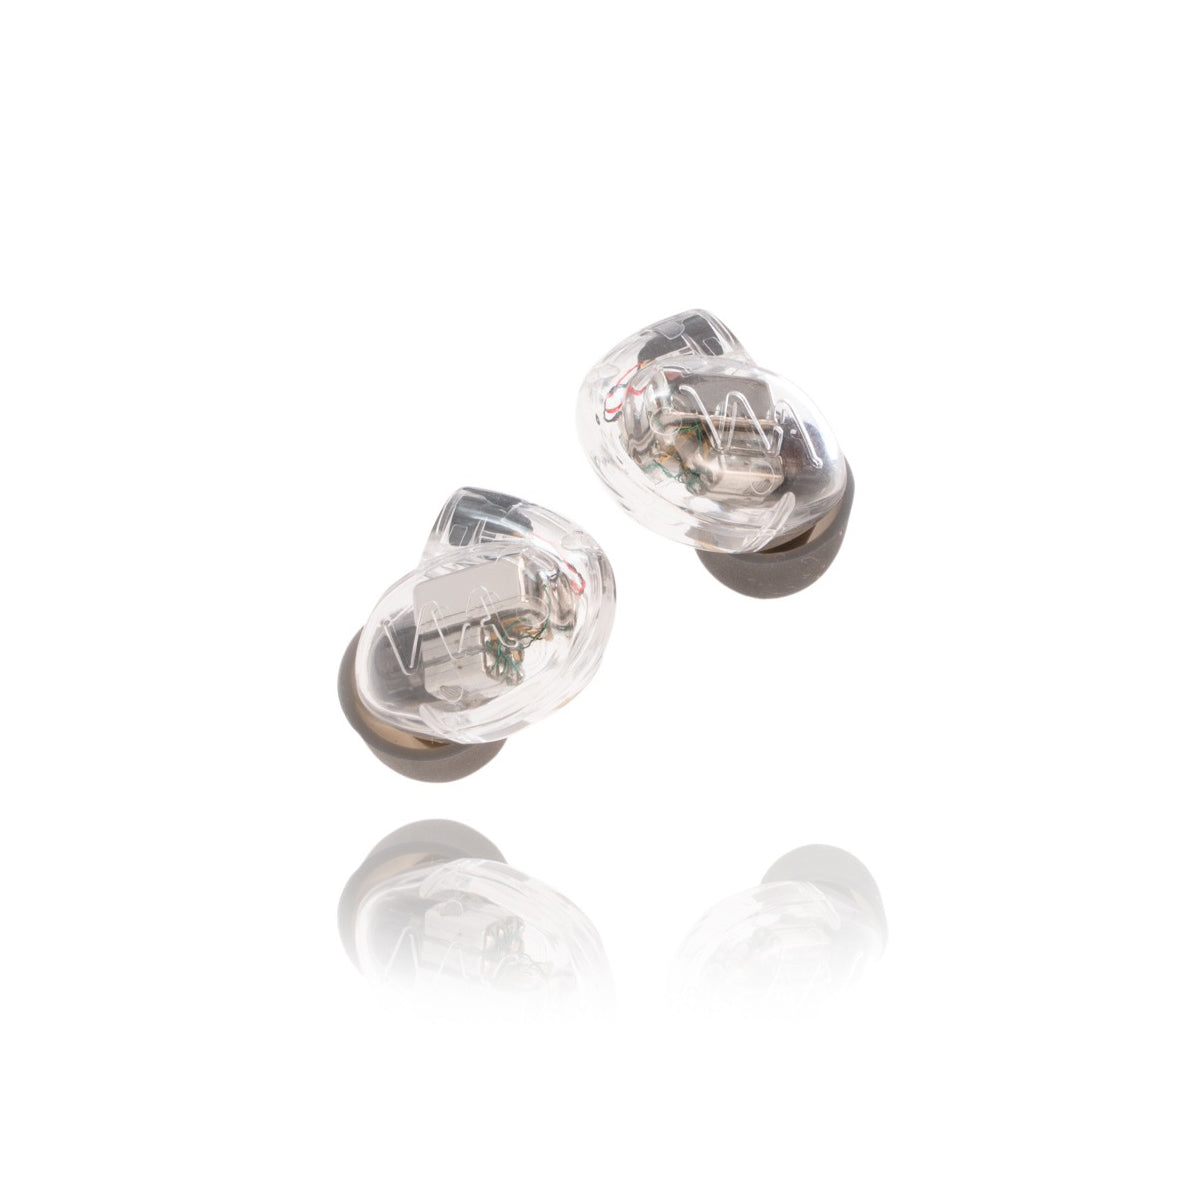 Westone Audio BAX Cable 50 Clear, T2 Connector